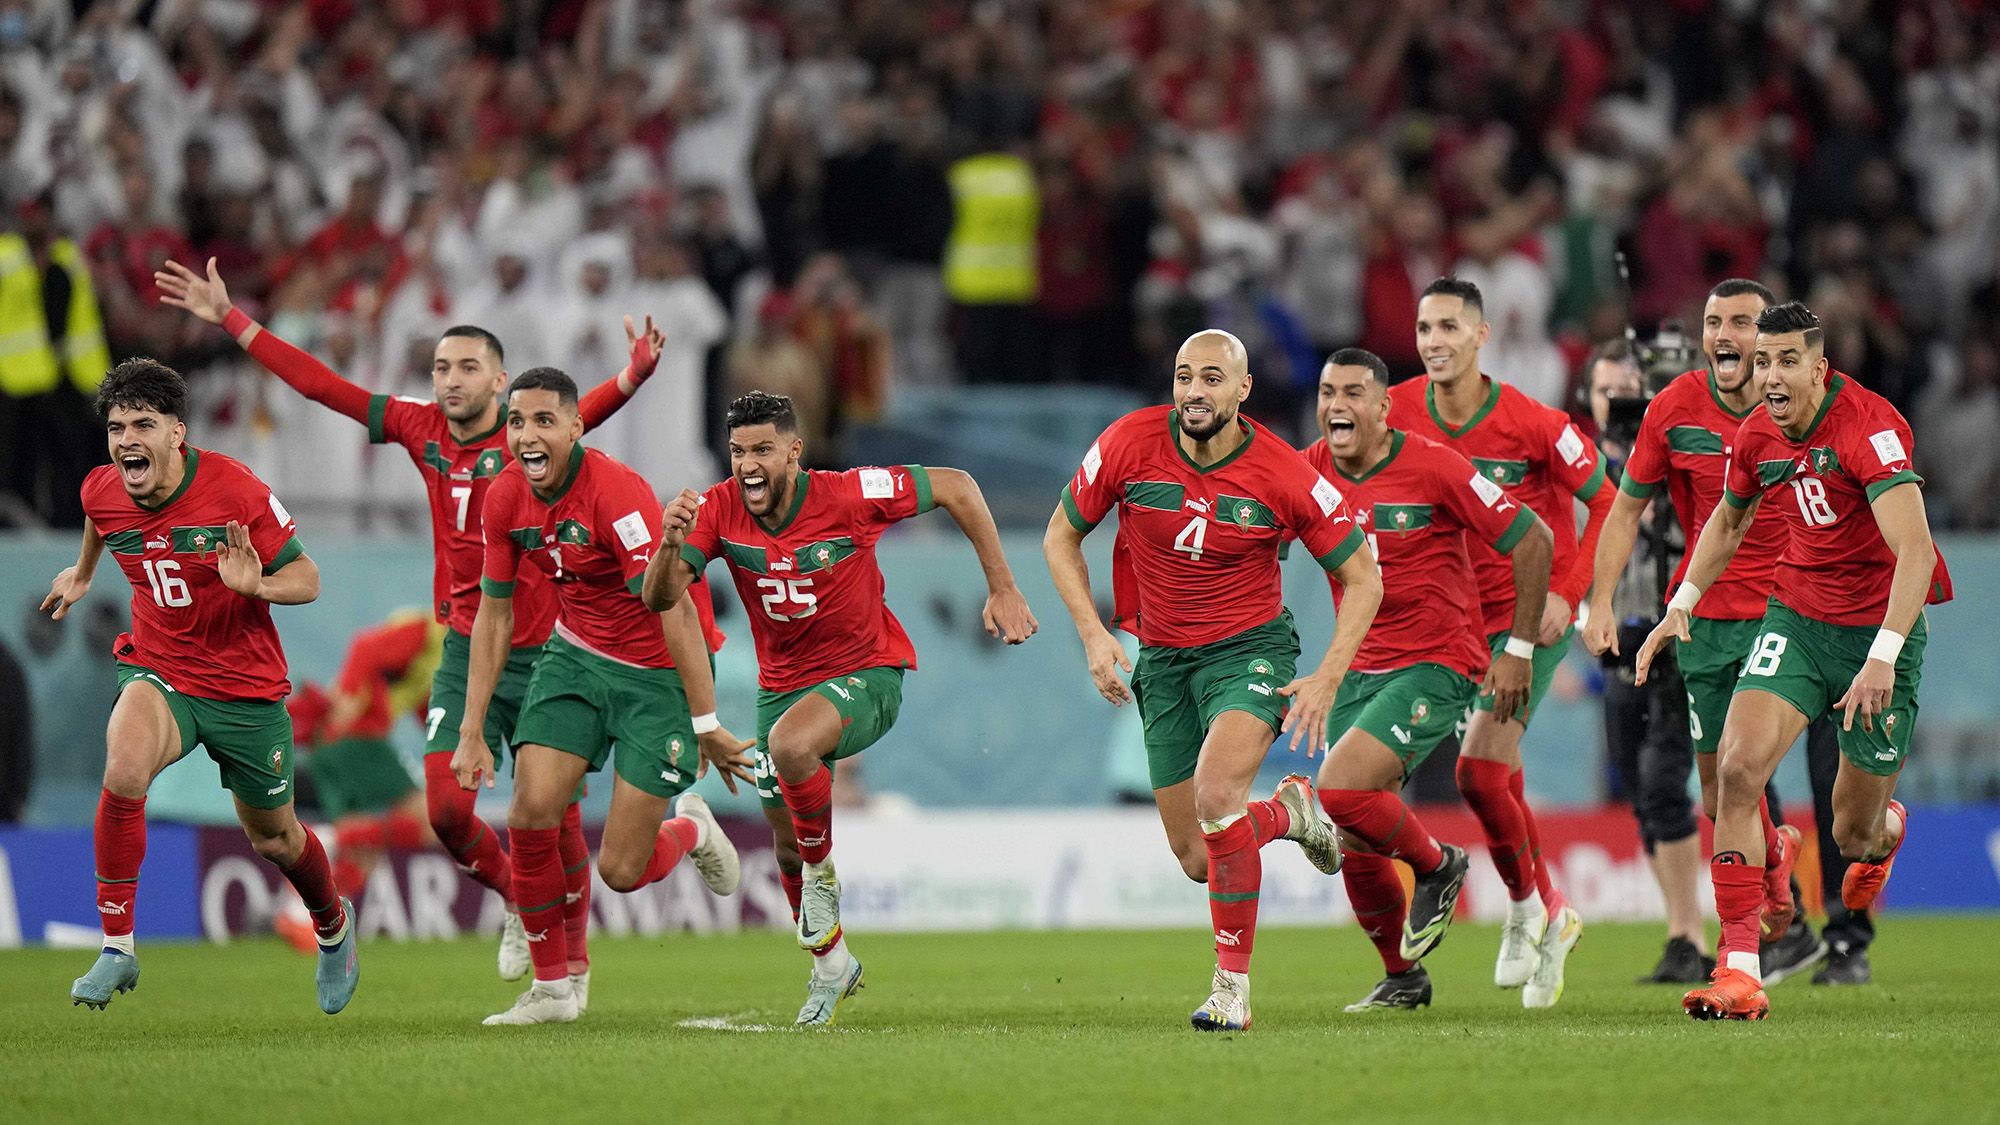 Fifa criticism adds to Morocco hat-trick of World Cup losses